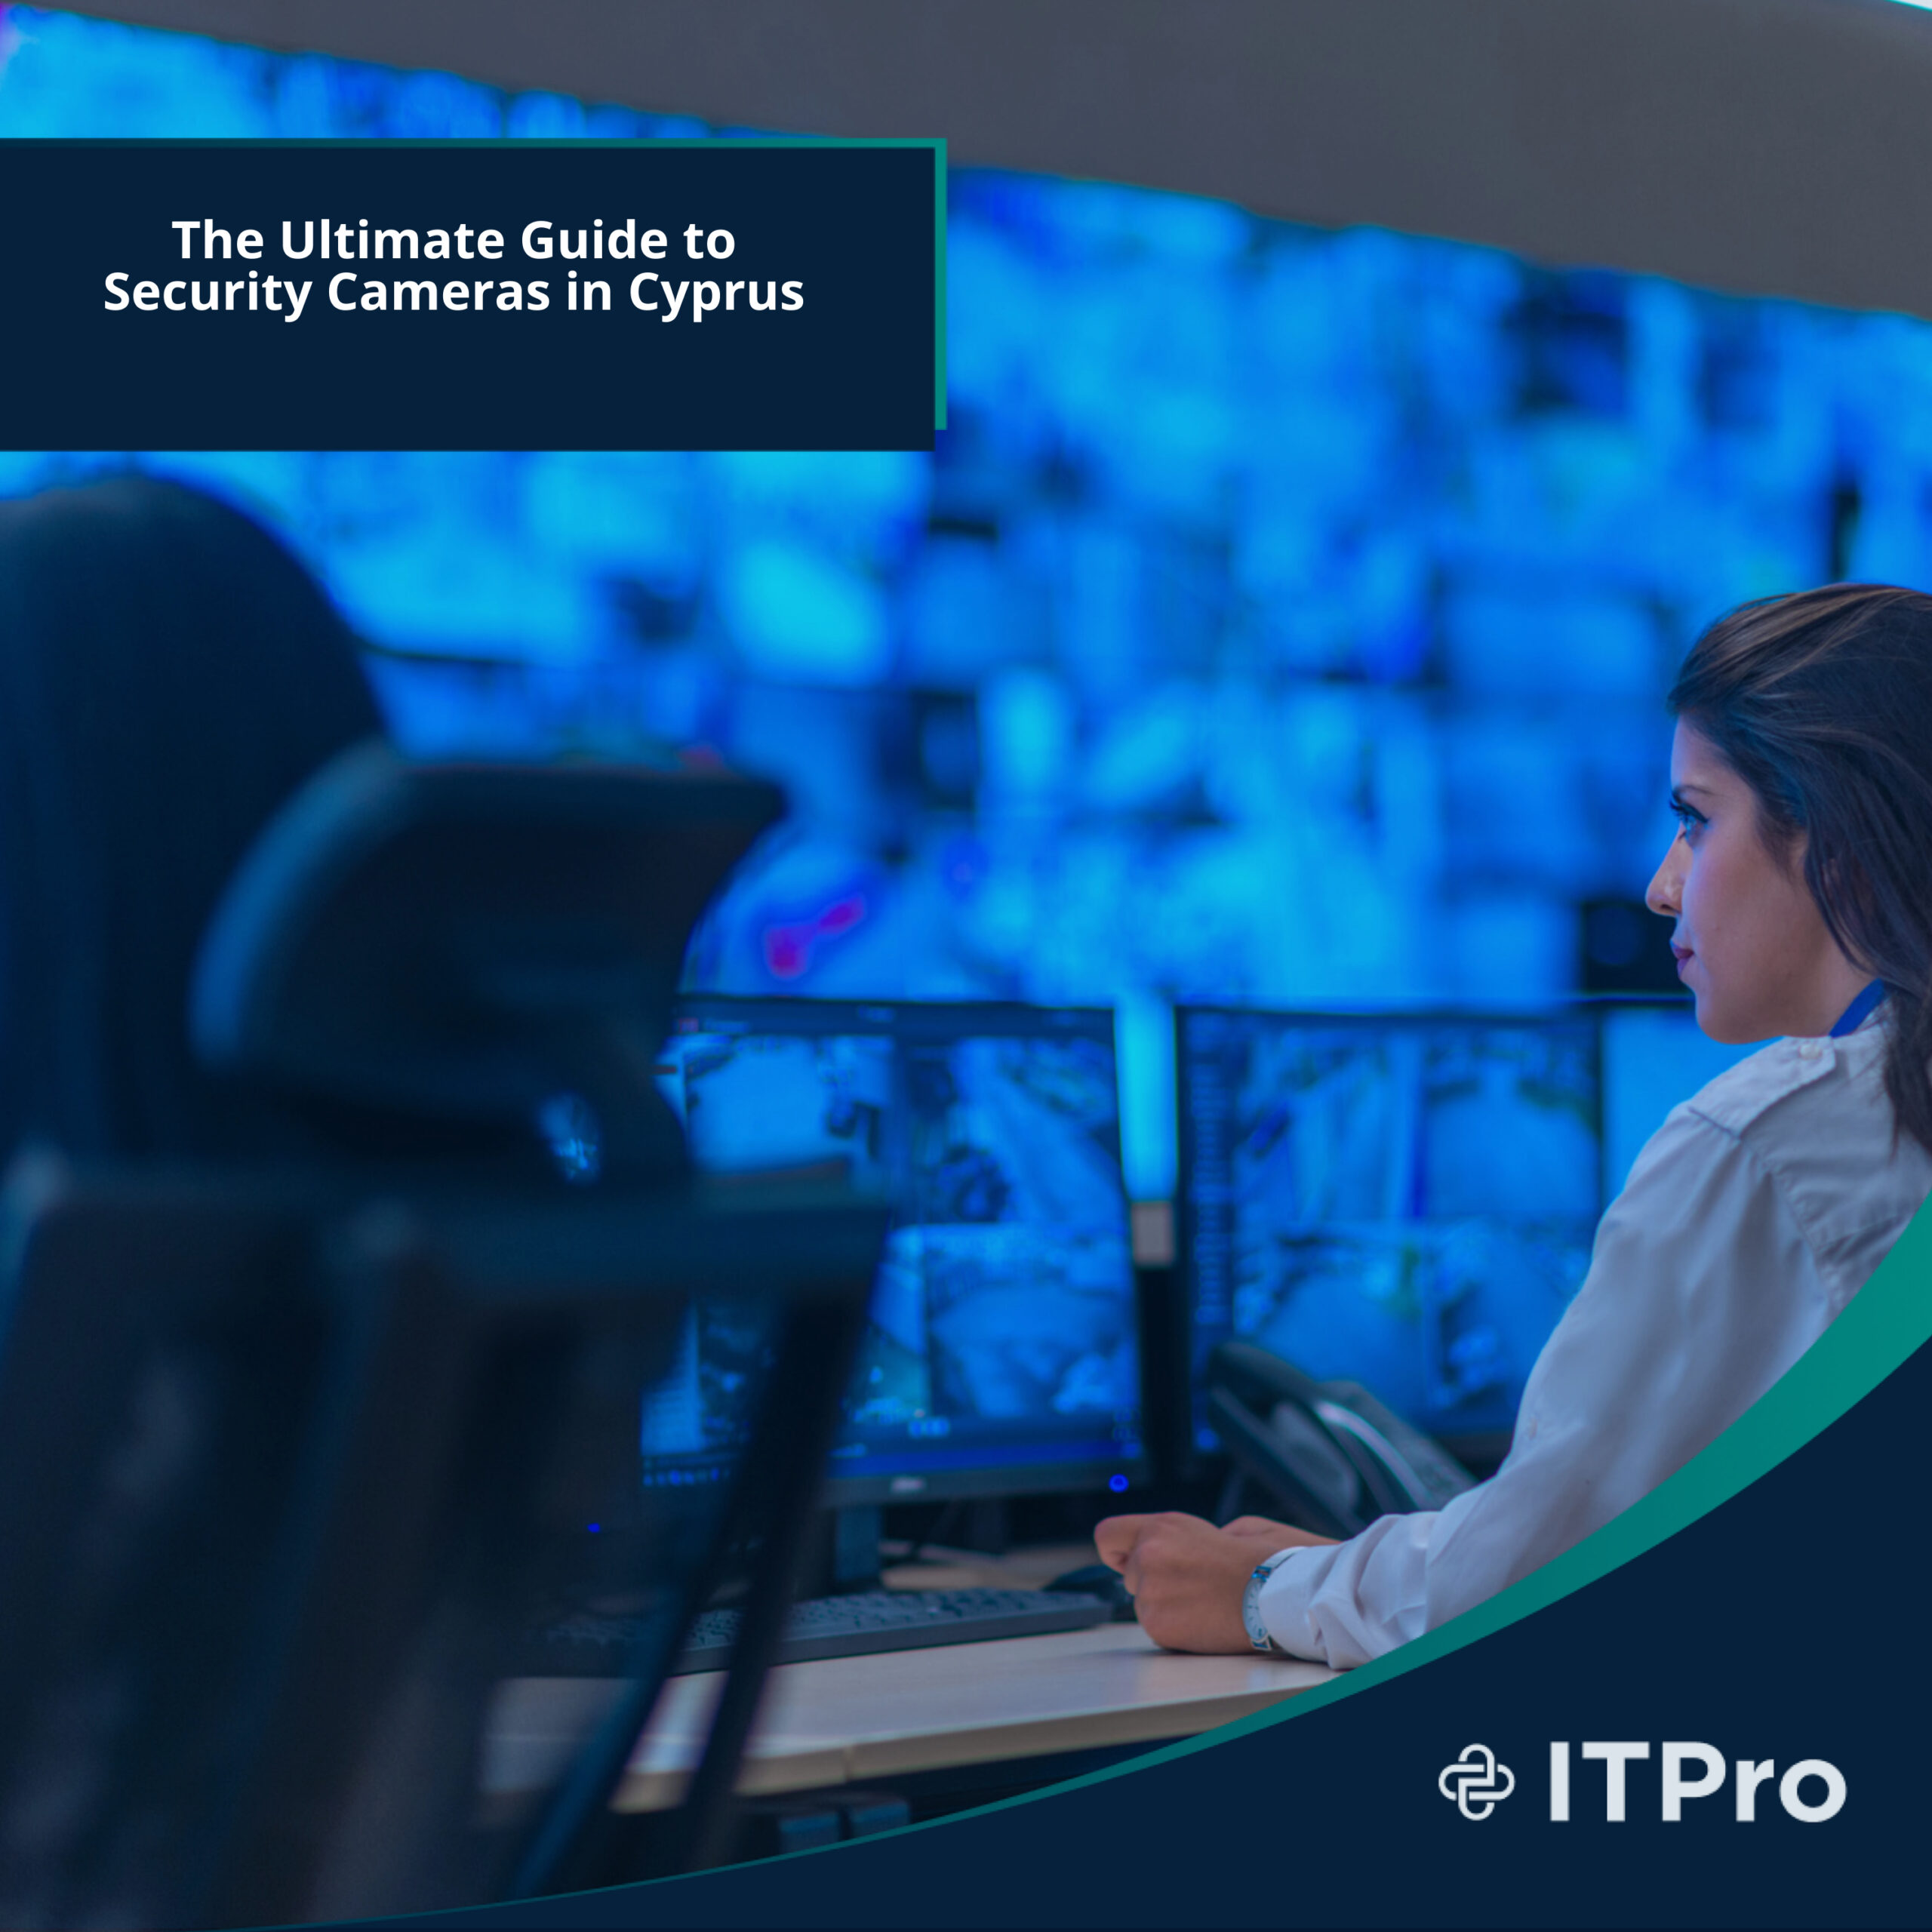 The Ultimate Guide to Security Cameras in Cyprus